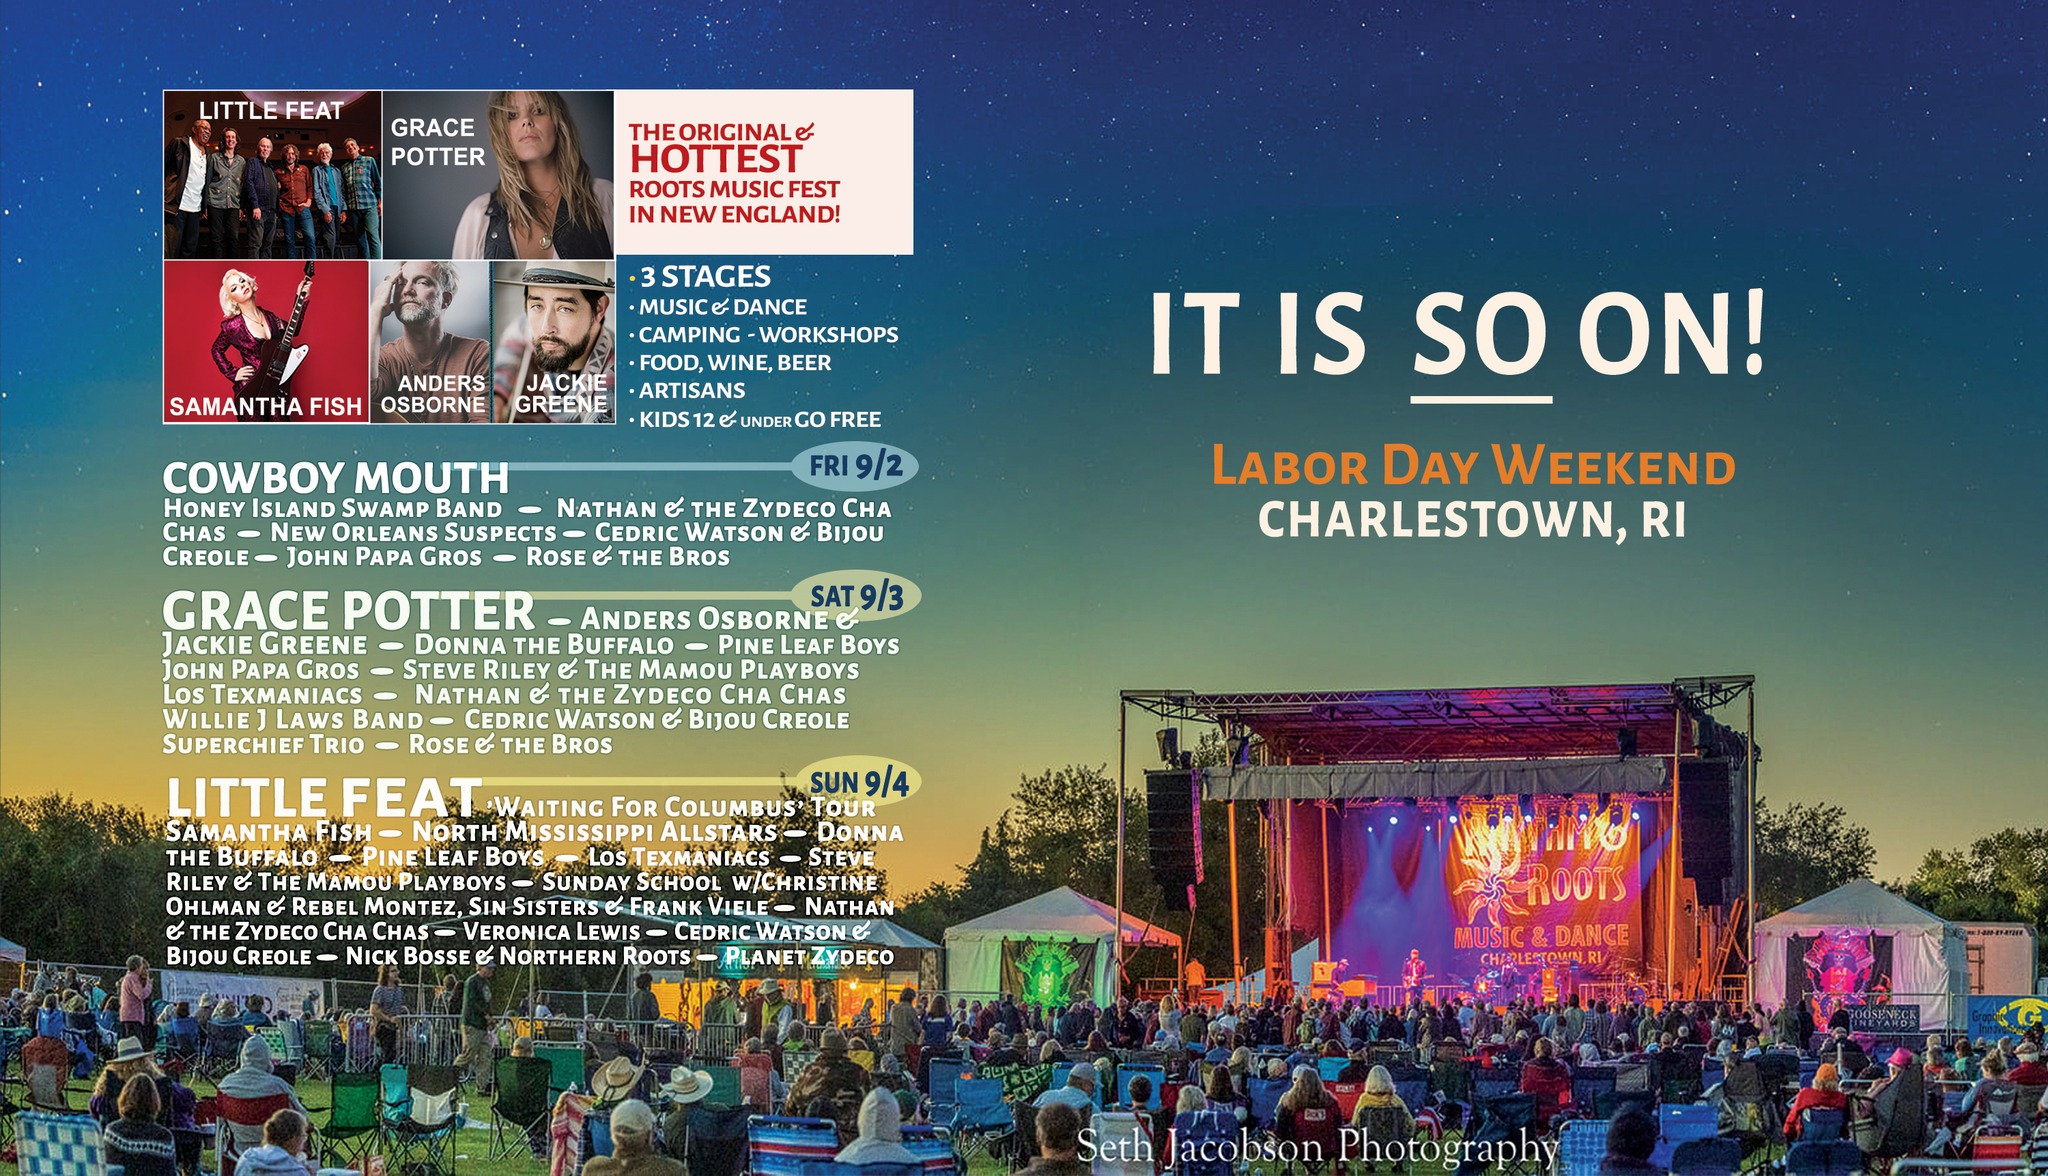 Rhythm & Roots Festival (Charlestown, RI) IS HAPPENING Labor Day Weekend